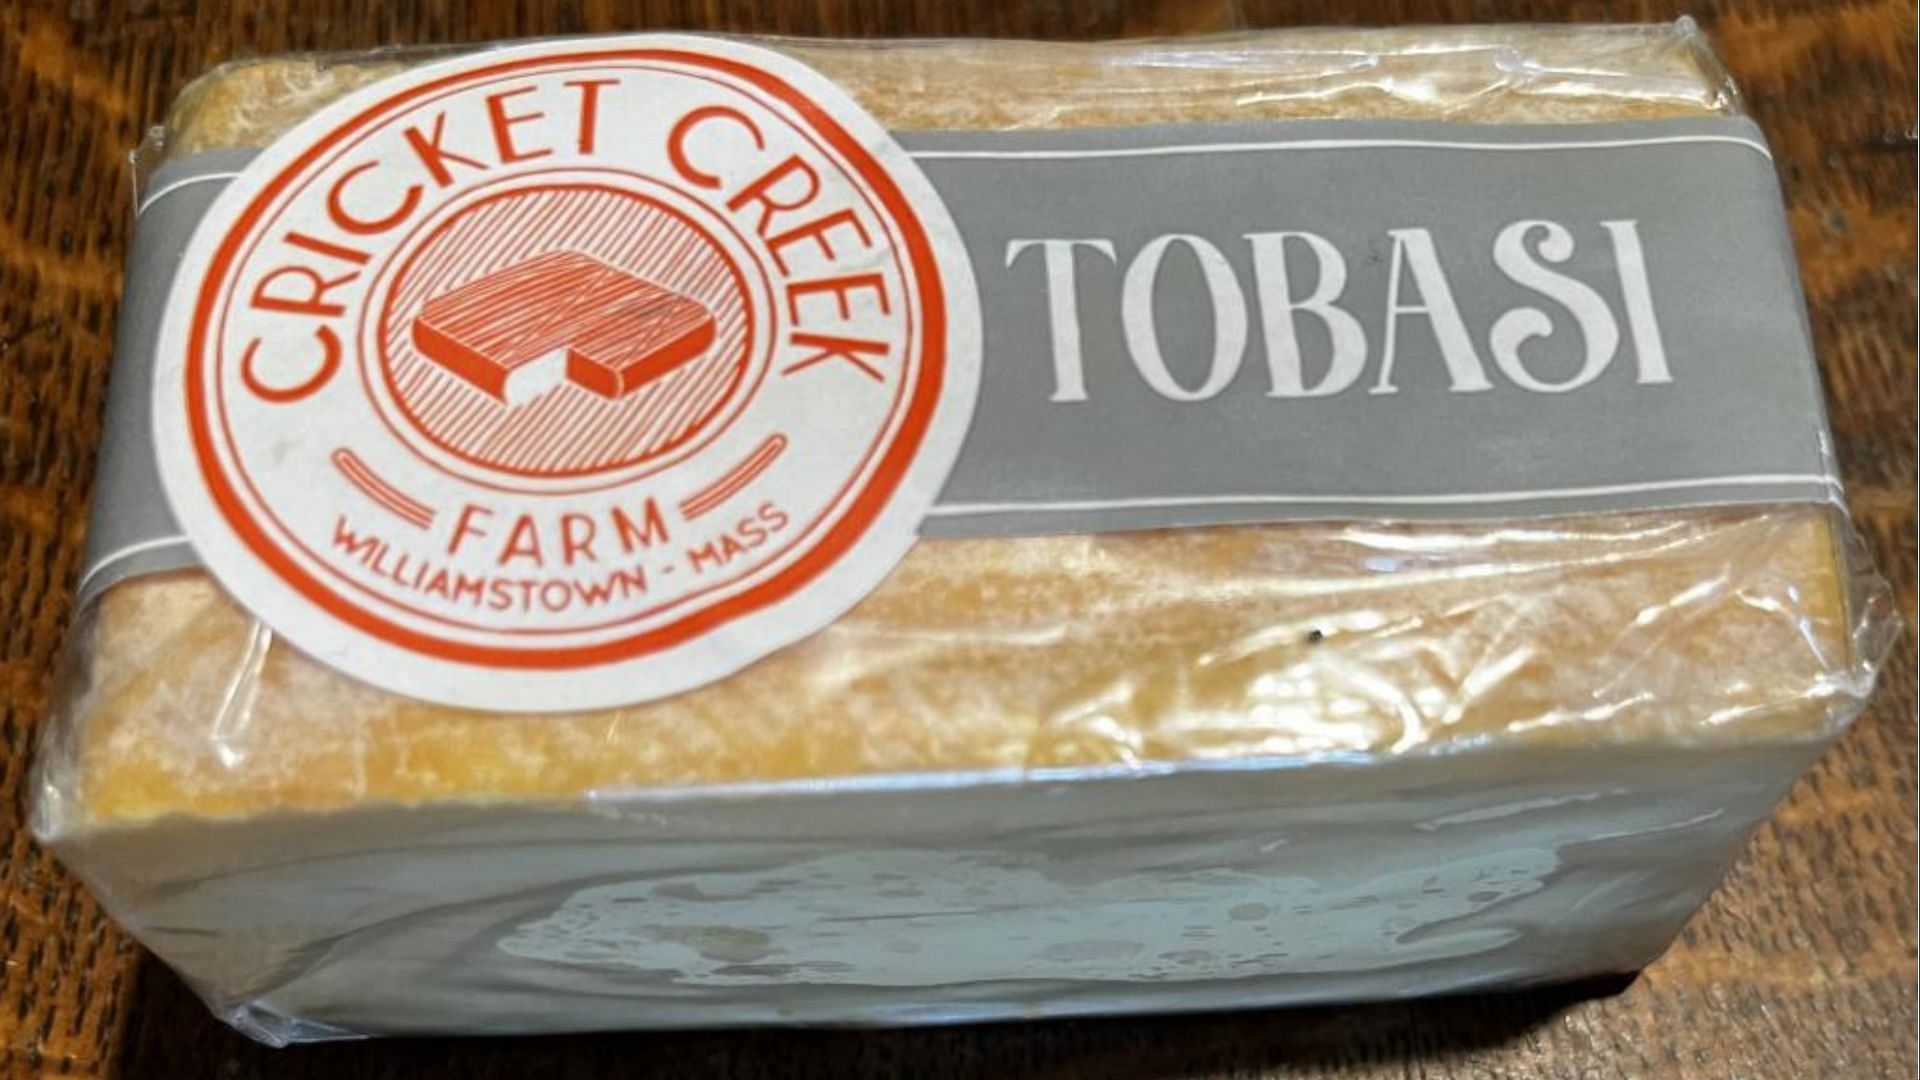 The recalled Tobasi cheese product by Cricket Creek Farm (Image via FDA)